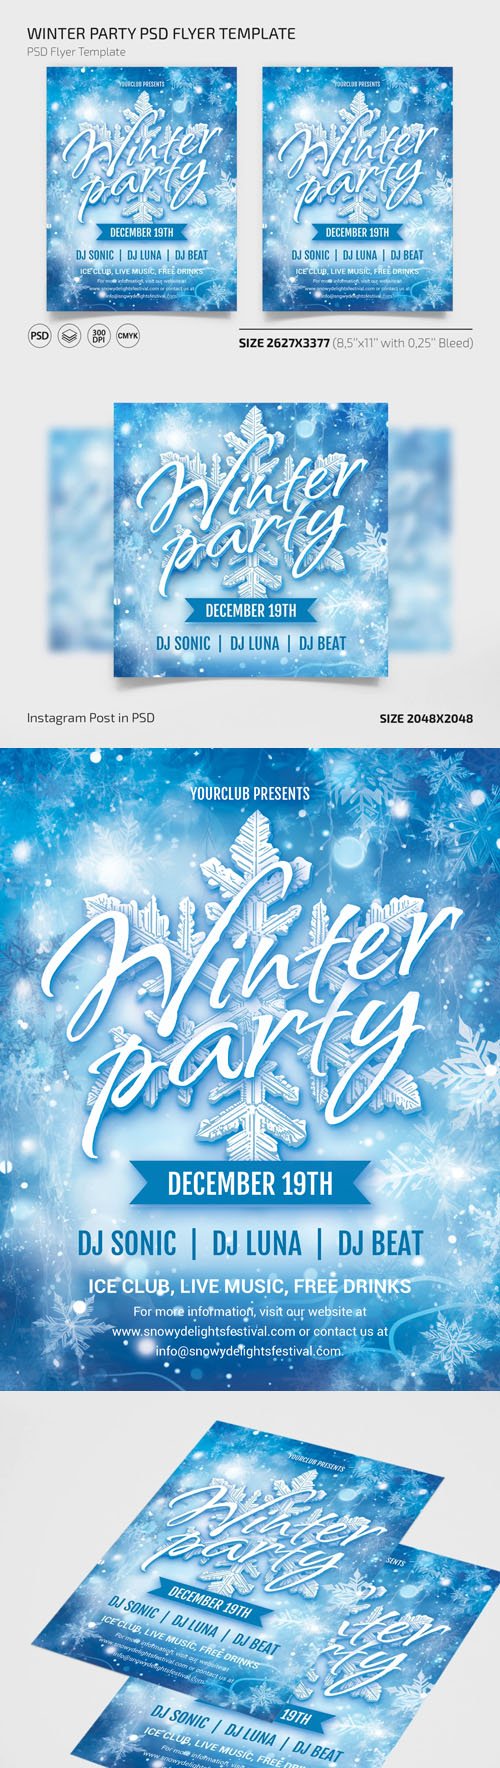 Winter Party PSD Flyer Template + Instagram Post